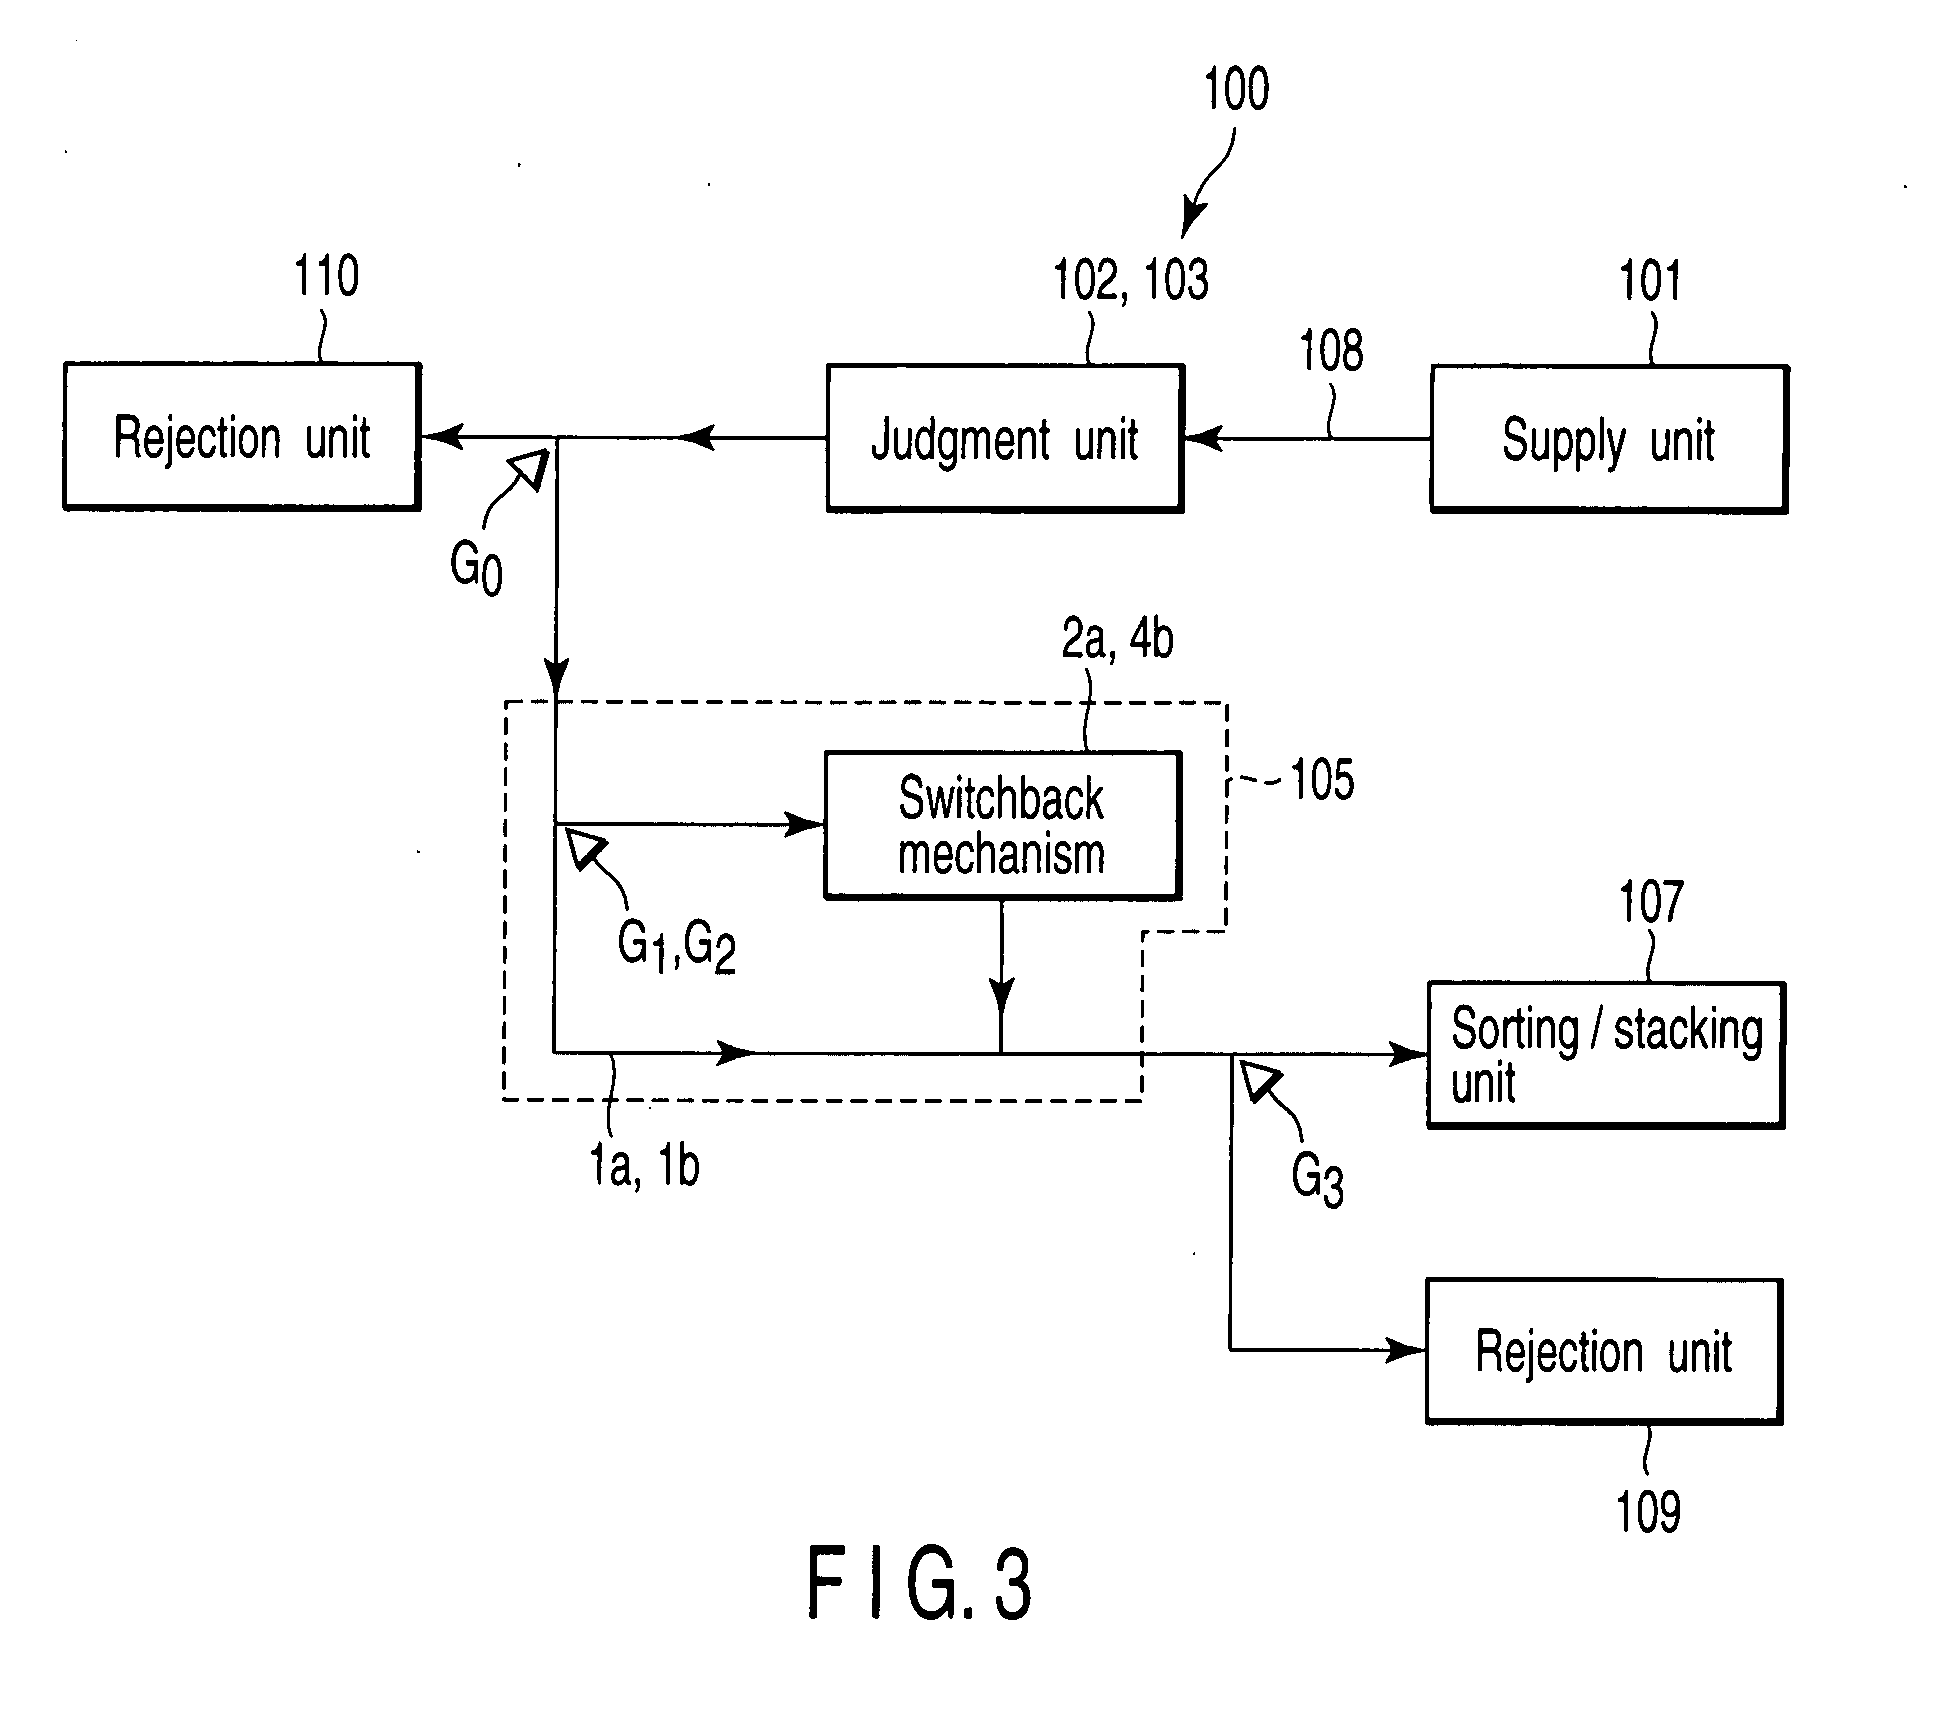 Switchback mechanism, switchback apparatus, and switchback method